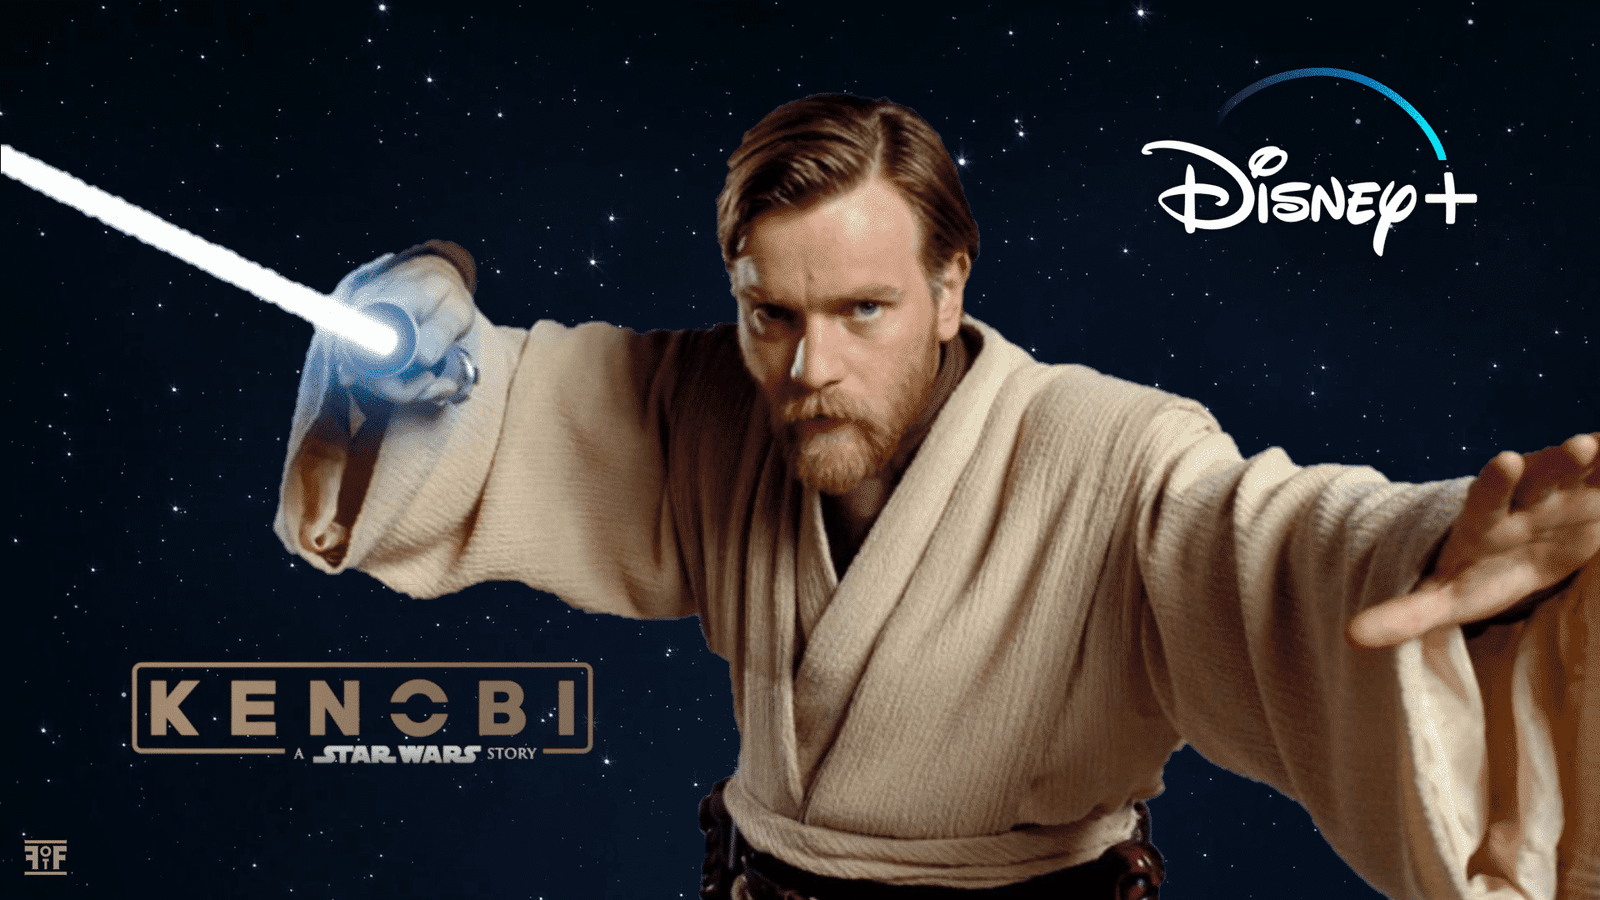 The series will come to Disney+ on May 25